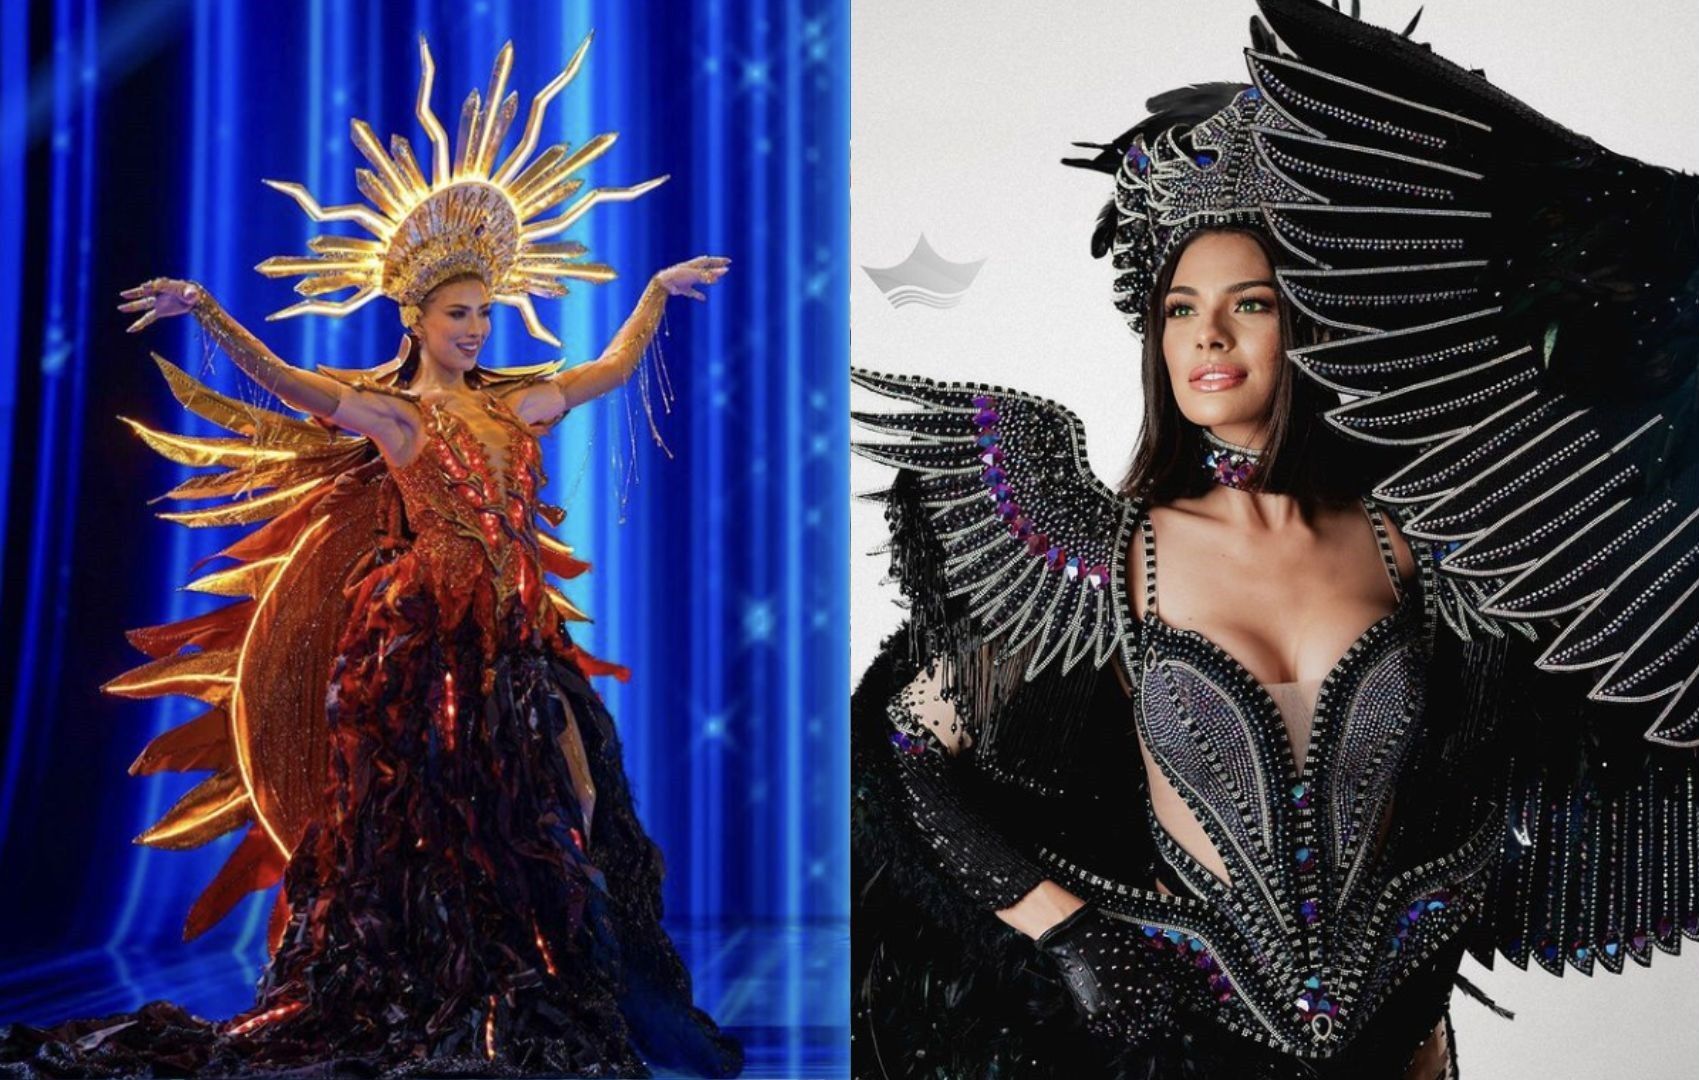 El Salvador, Nicaragua stand out in Miss Universe 2023 national costume show